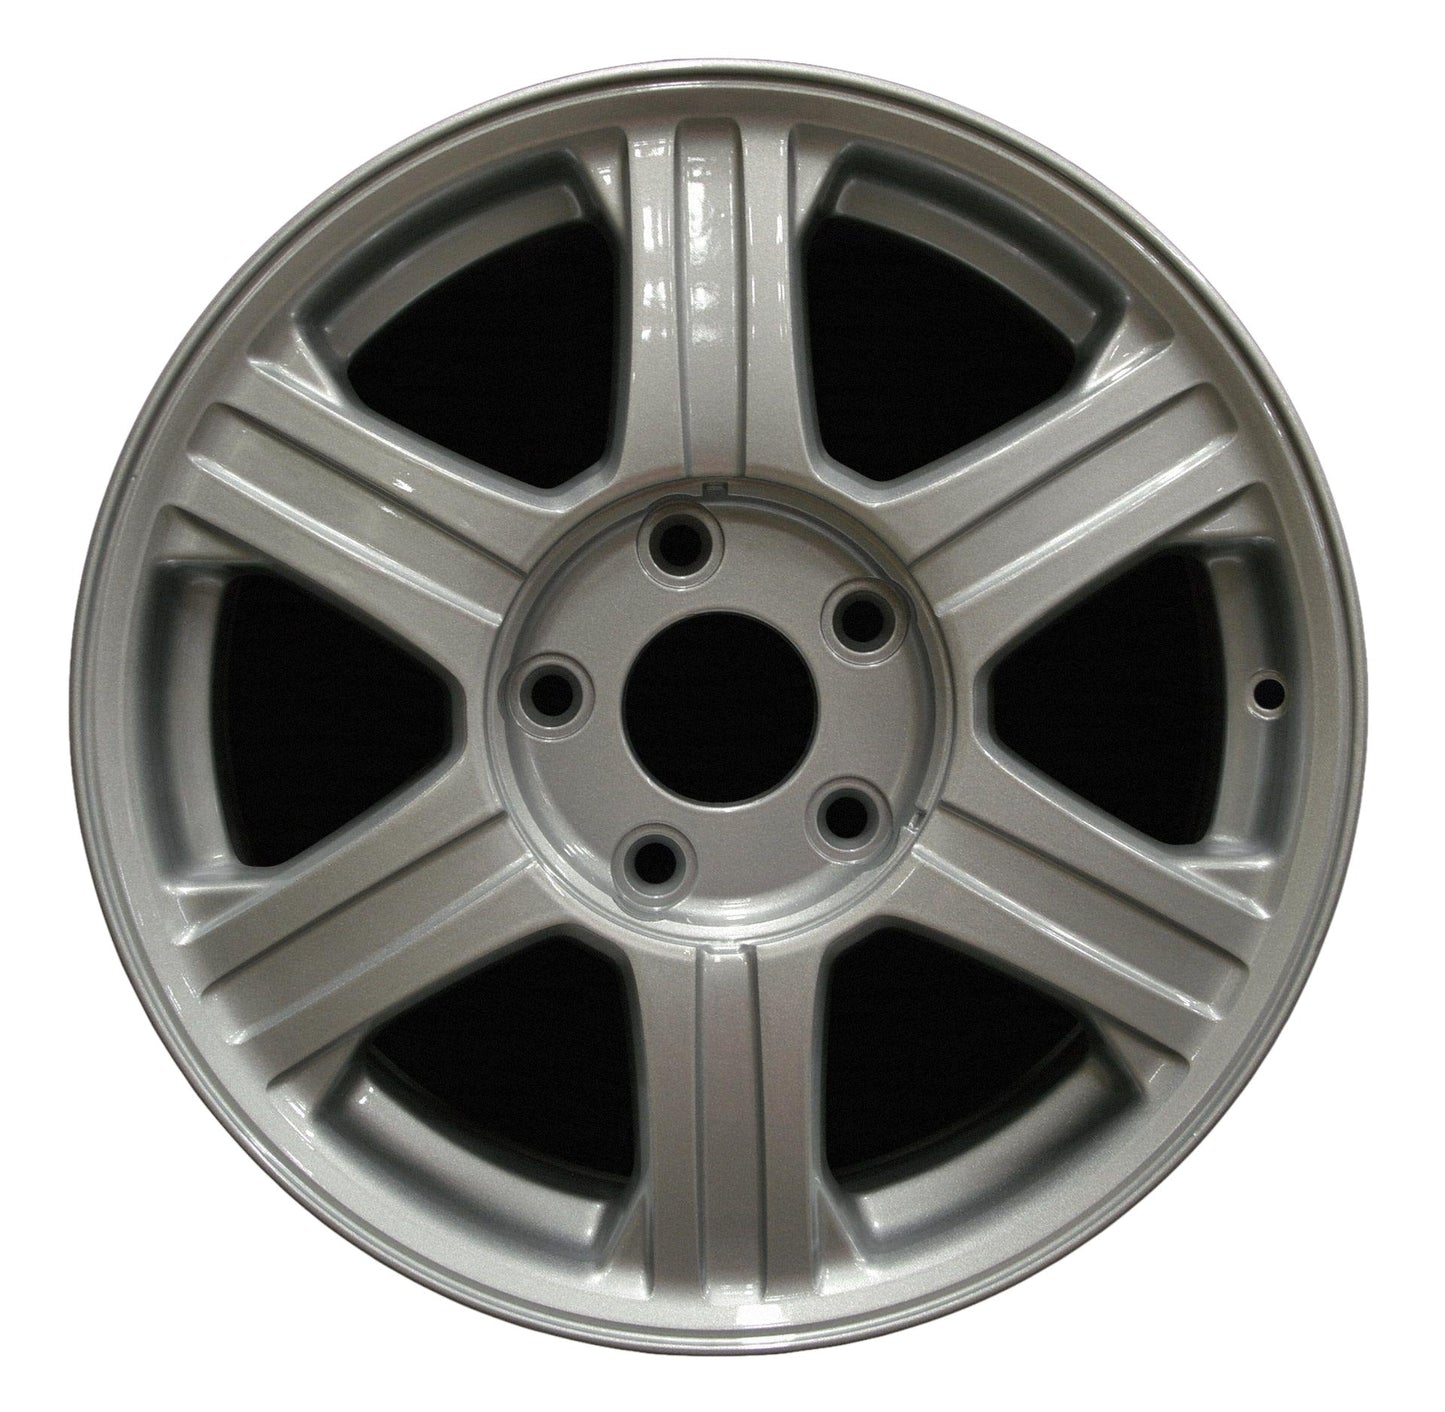 Chrysler Pacifica  2004, 2005, 2006, 2007, 2008 Factory OEM Car Wheel Size 17x7.5 Alloy WAO.2216C.PS02.FF